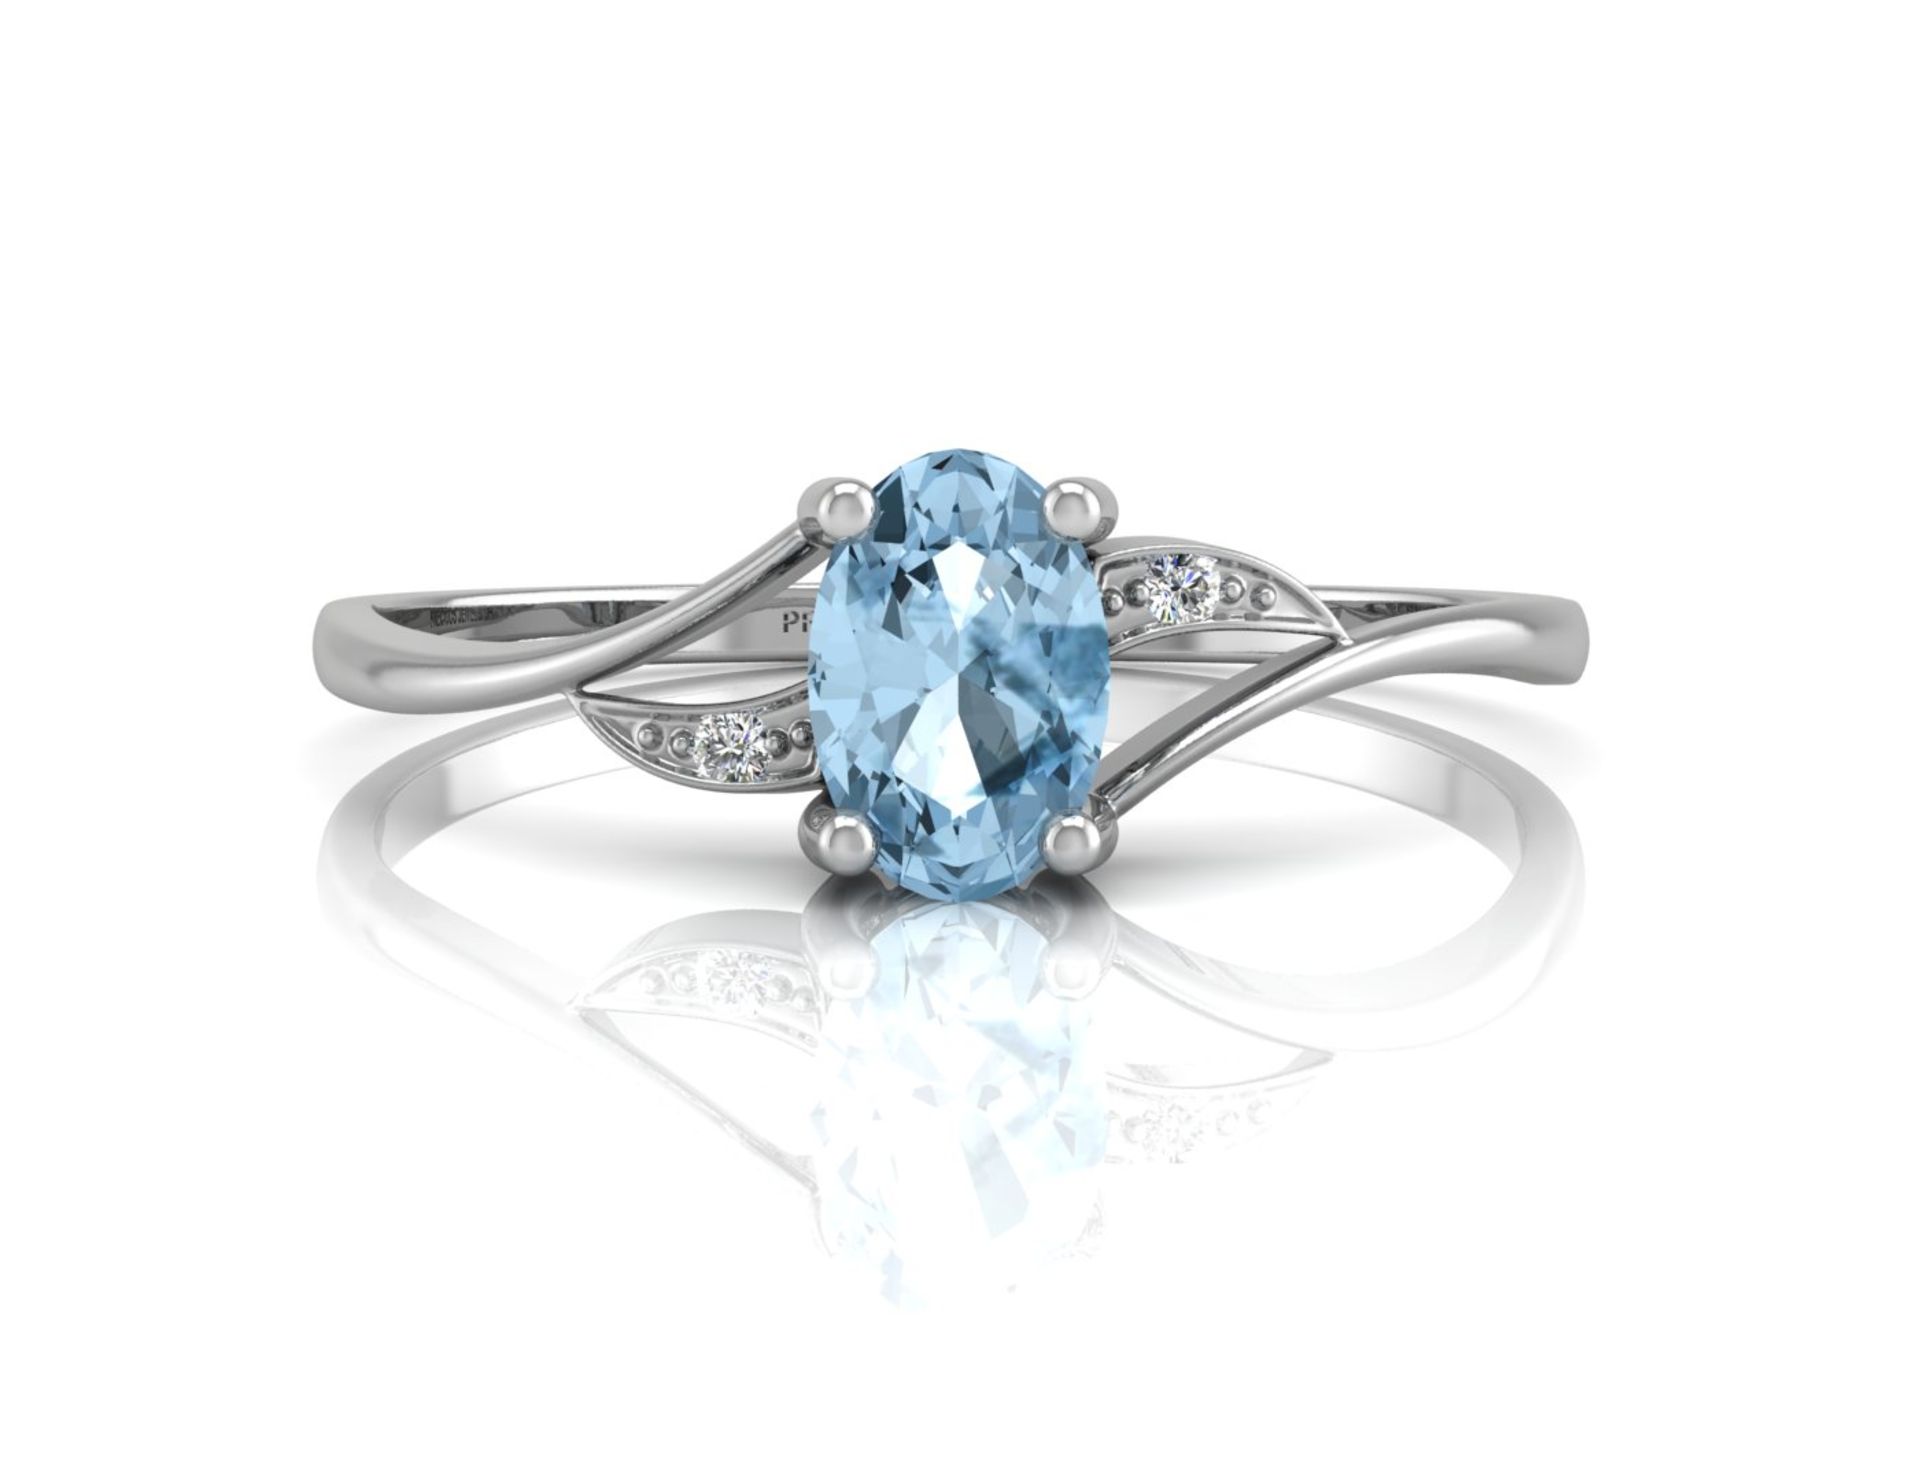 9ct White Gold Diamond And Blue Topaz Ring (BT0.58) 0.01 Carats - Image 4 of 5